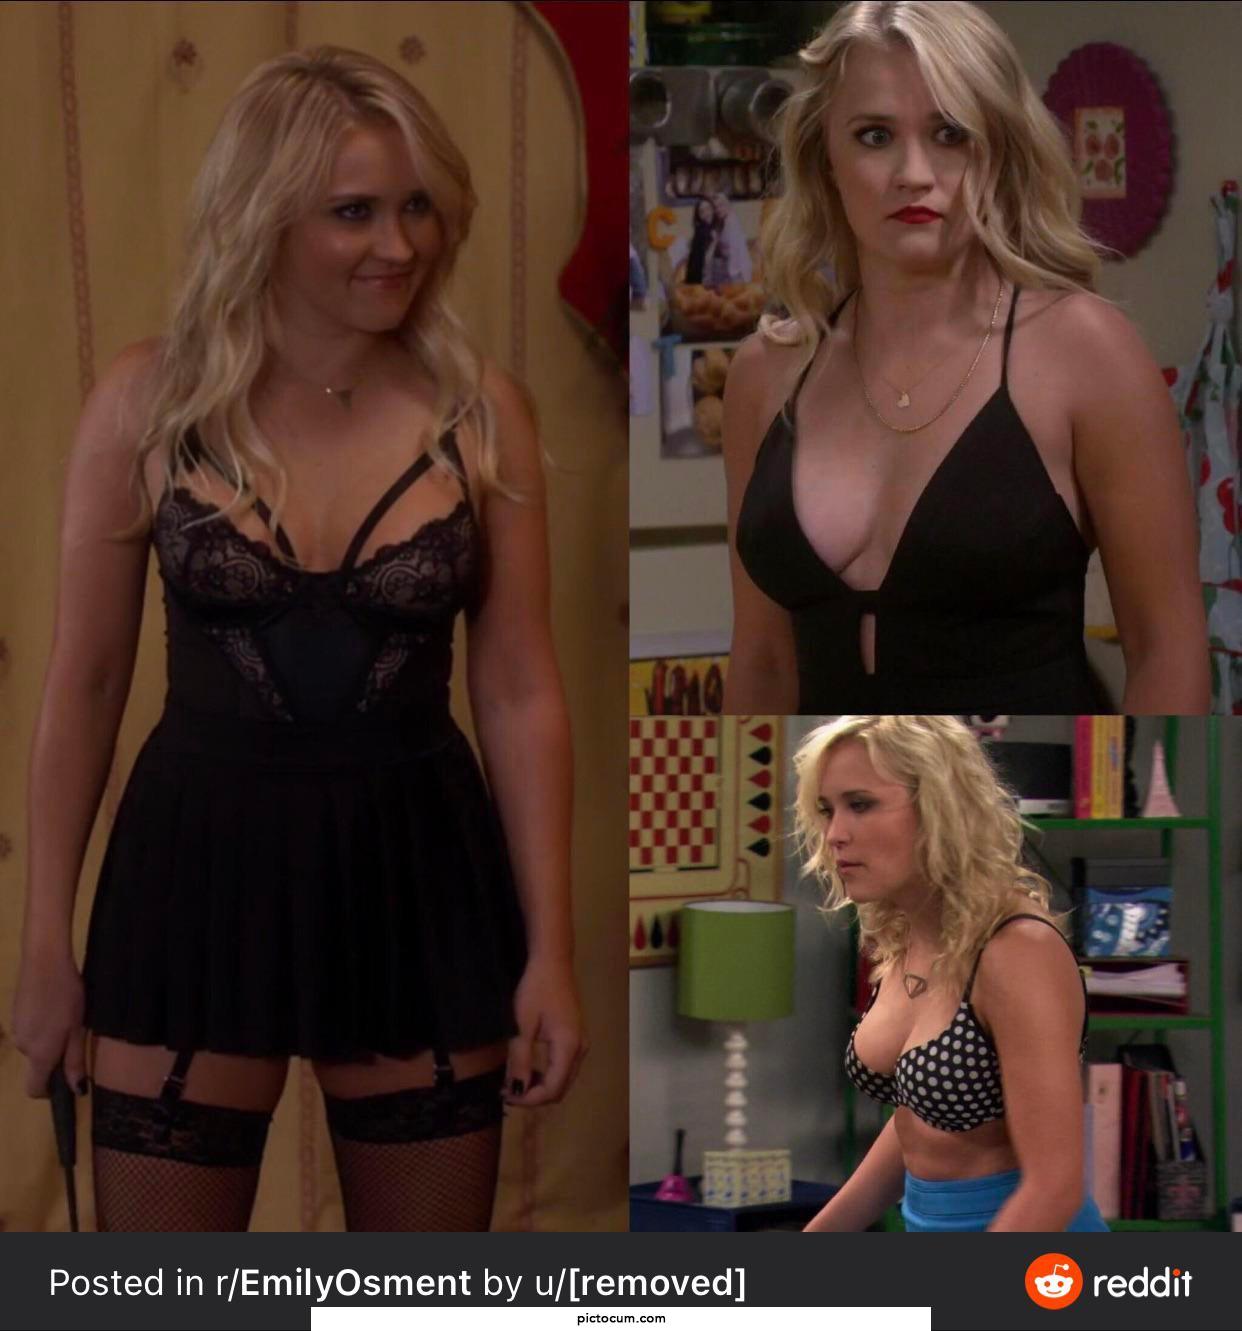 Anyone down to be Emily Osment in a detailed scenario?